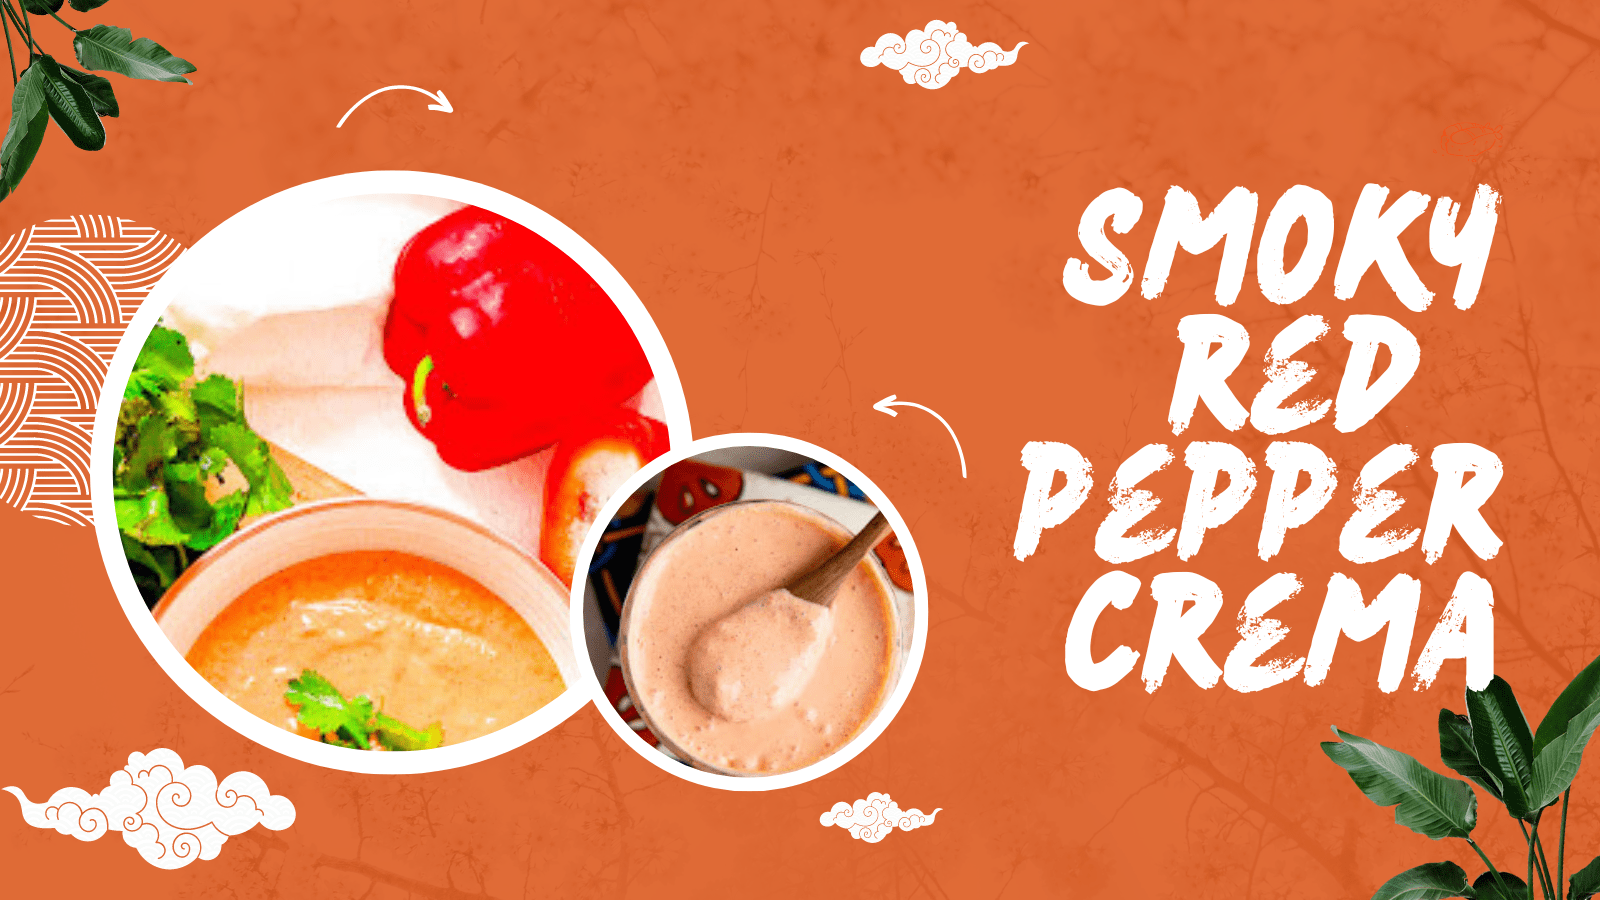 Smoky Red Pepper Crema Recipe: A Fiery and Flavorful Delight